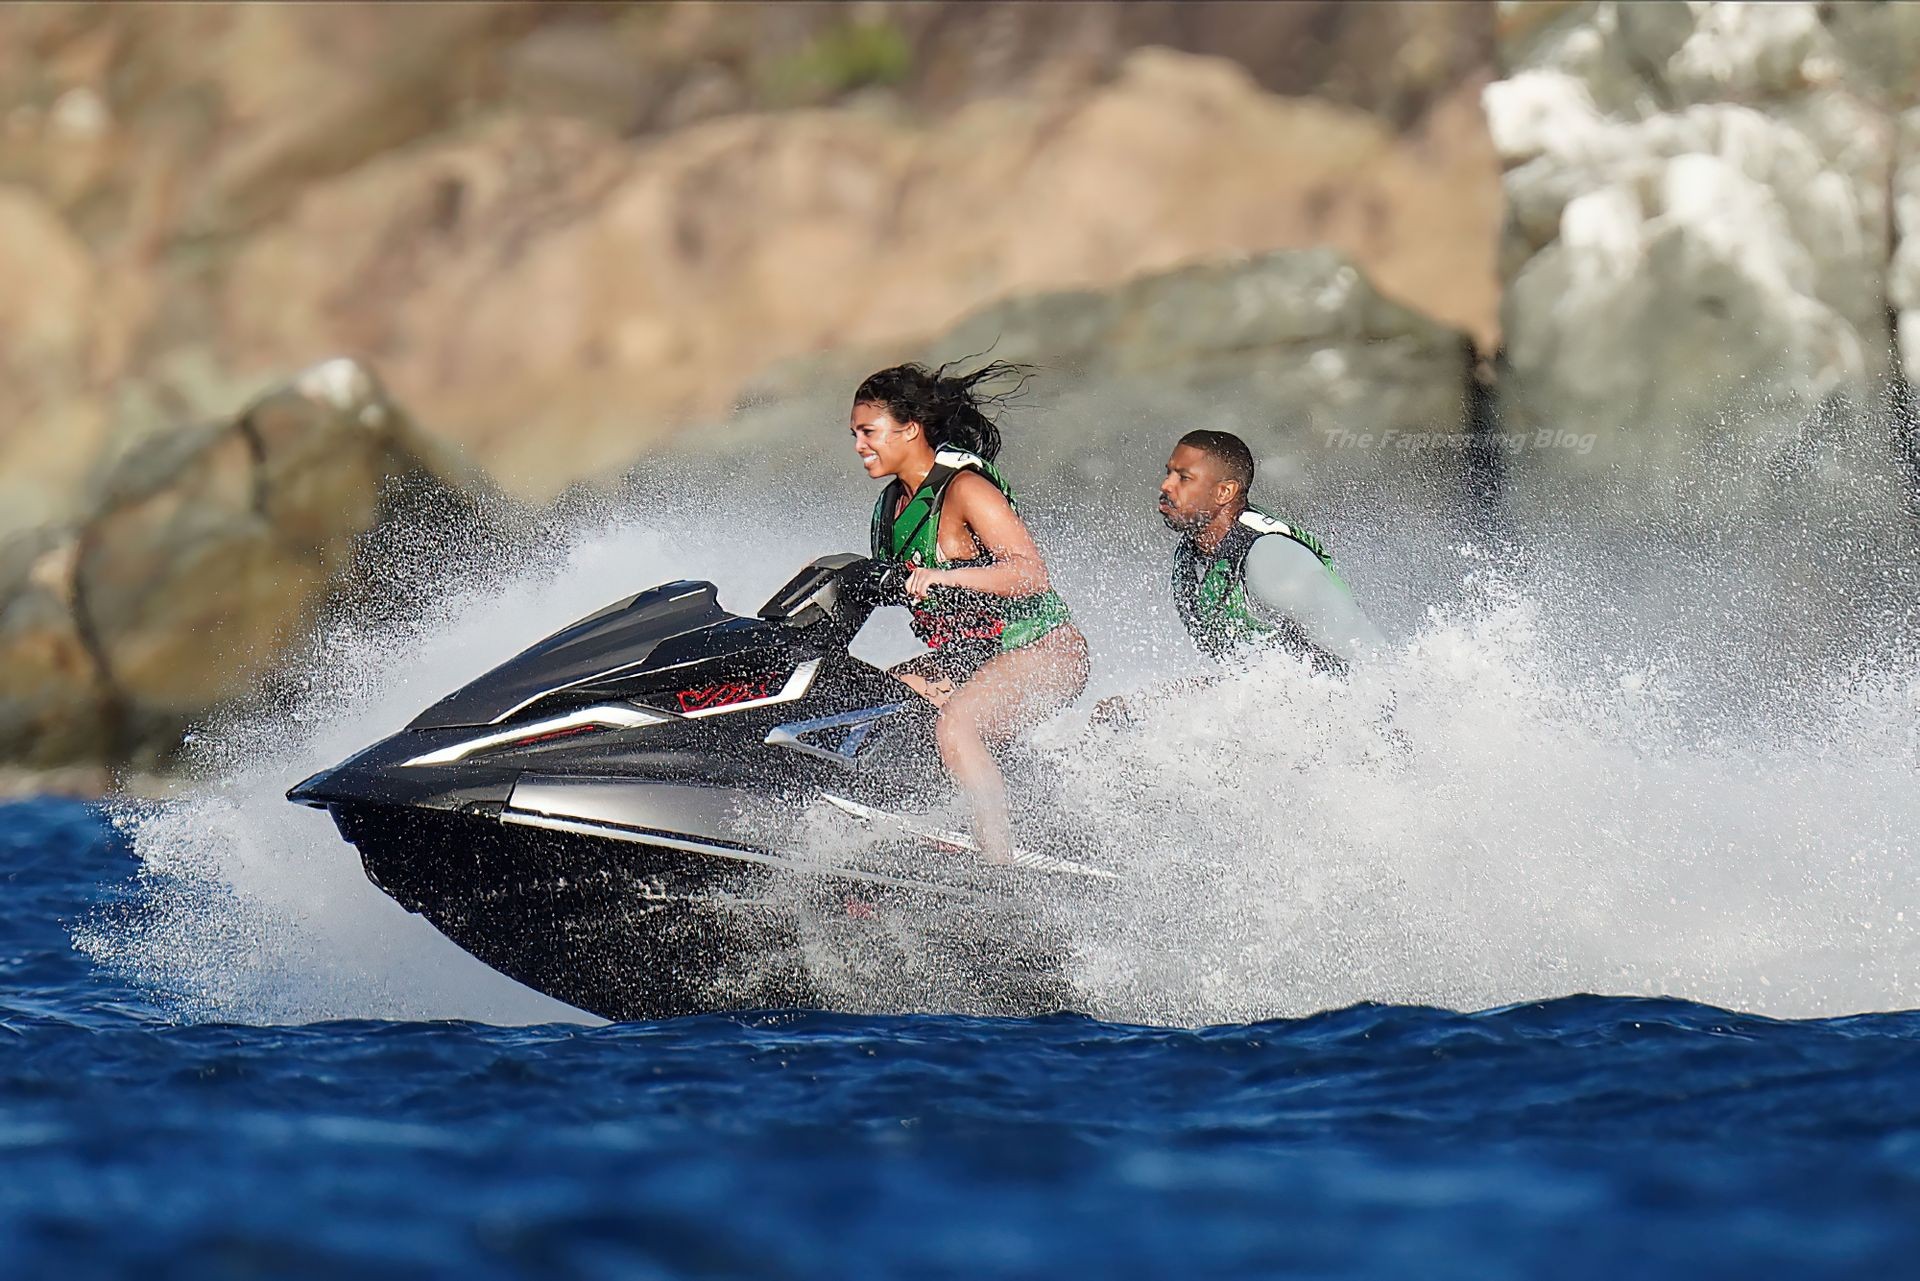 Michael B. Jordan & Lori Harvey are Seen While Holidaying on a Yacht in St Barts (38 Photos)